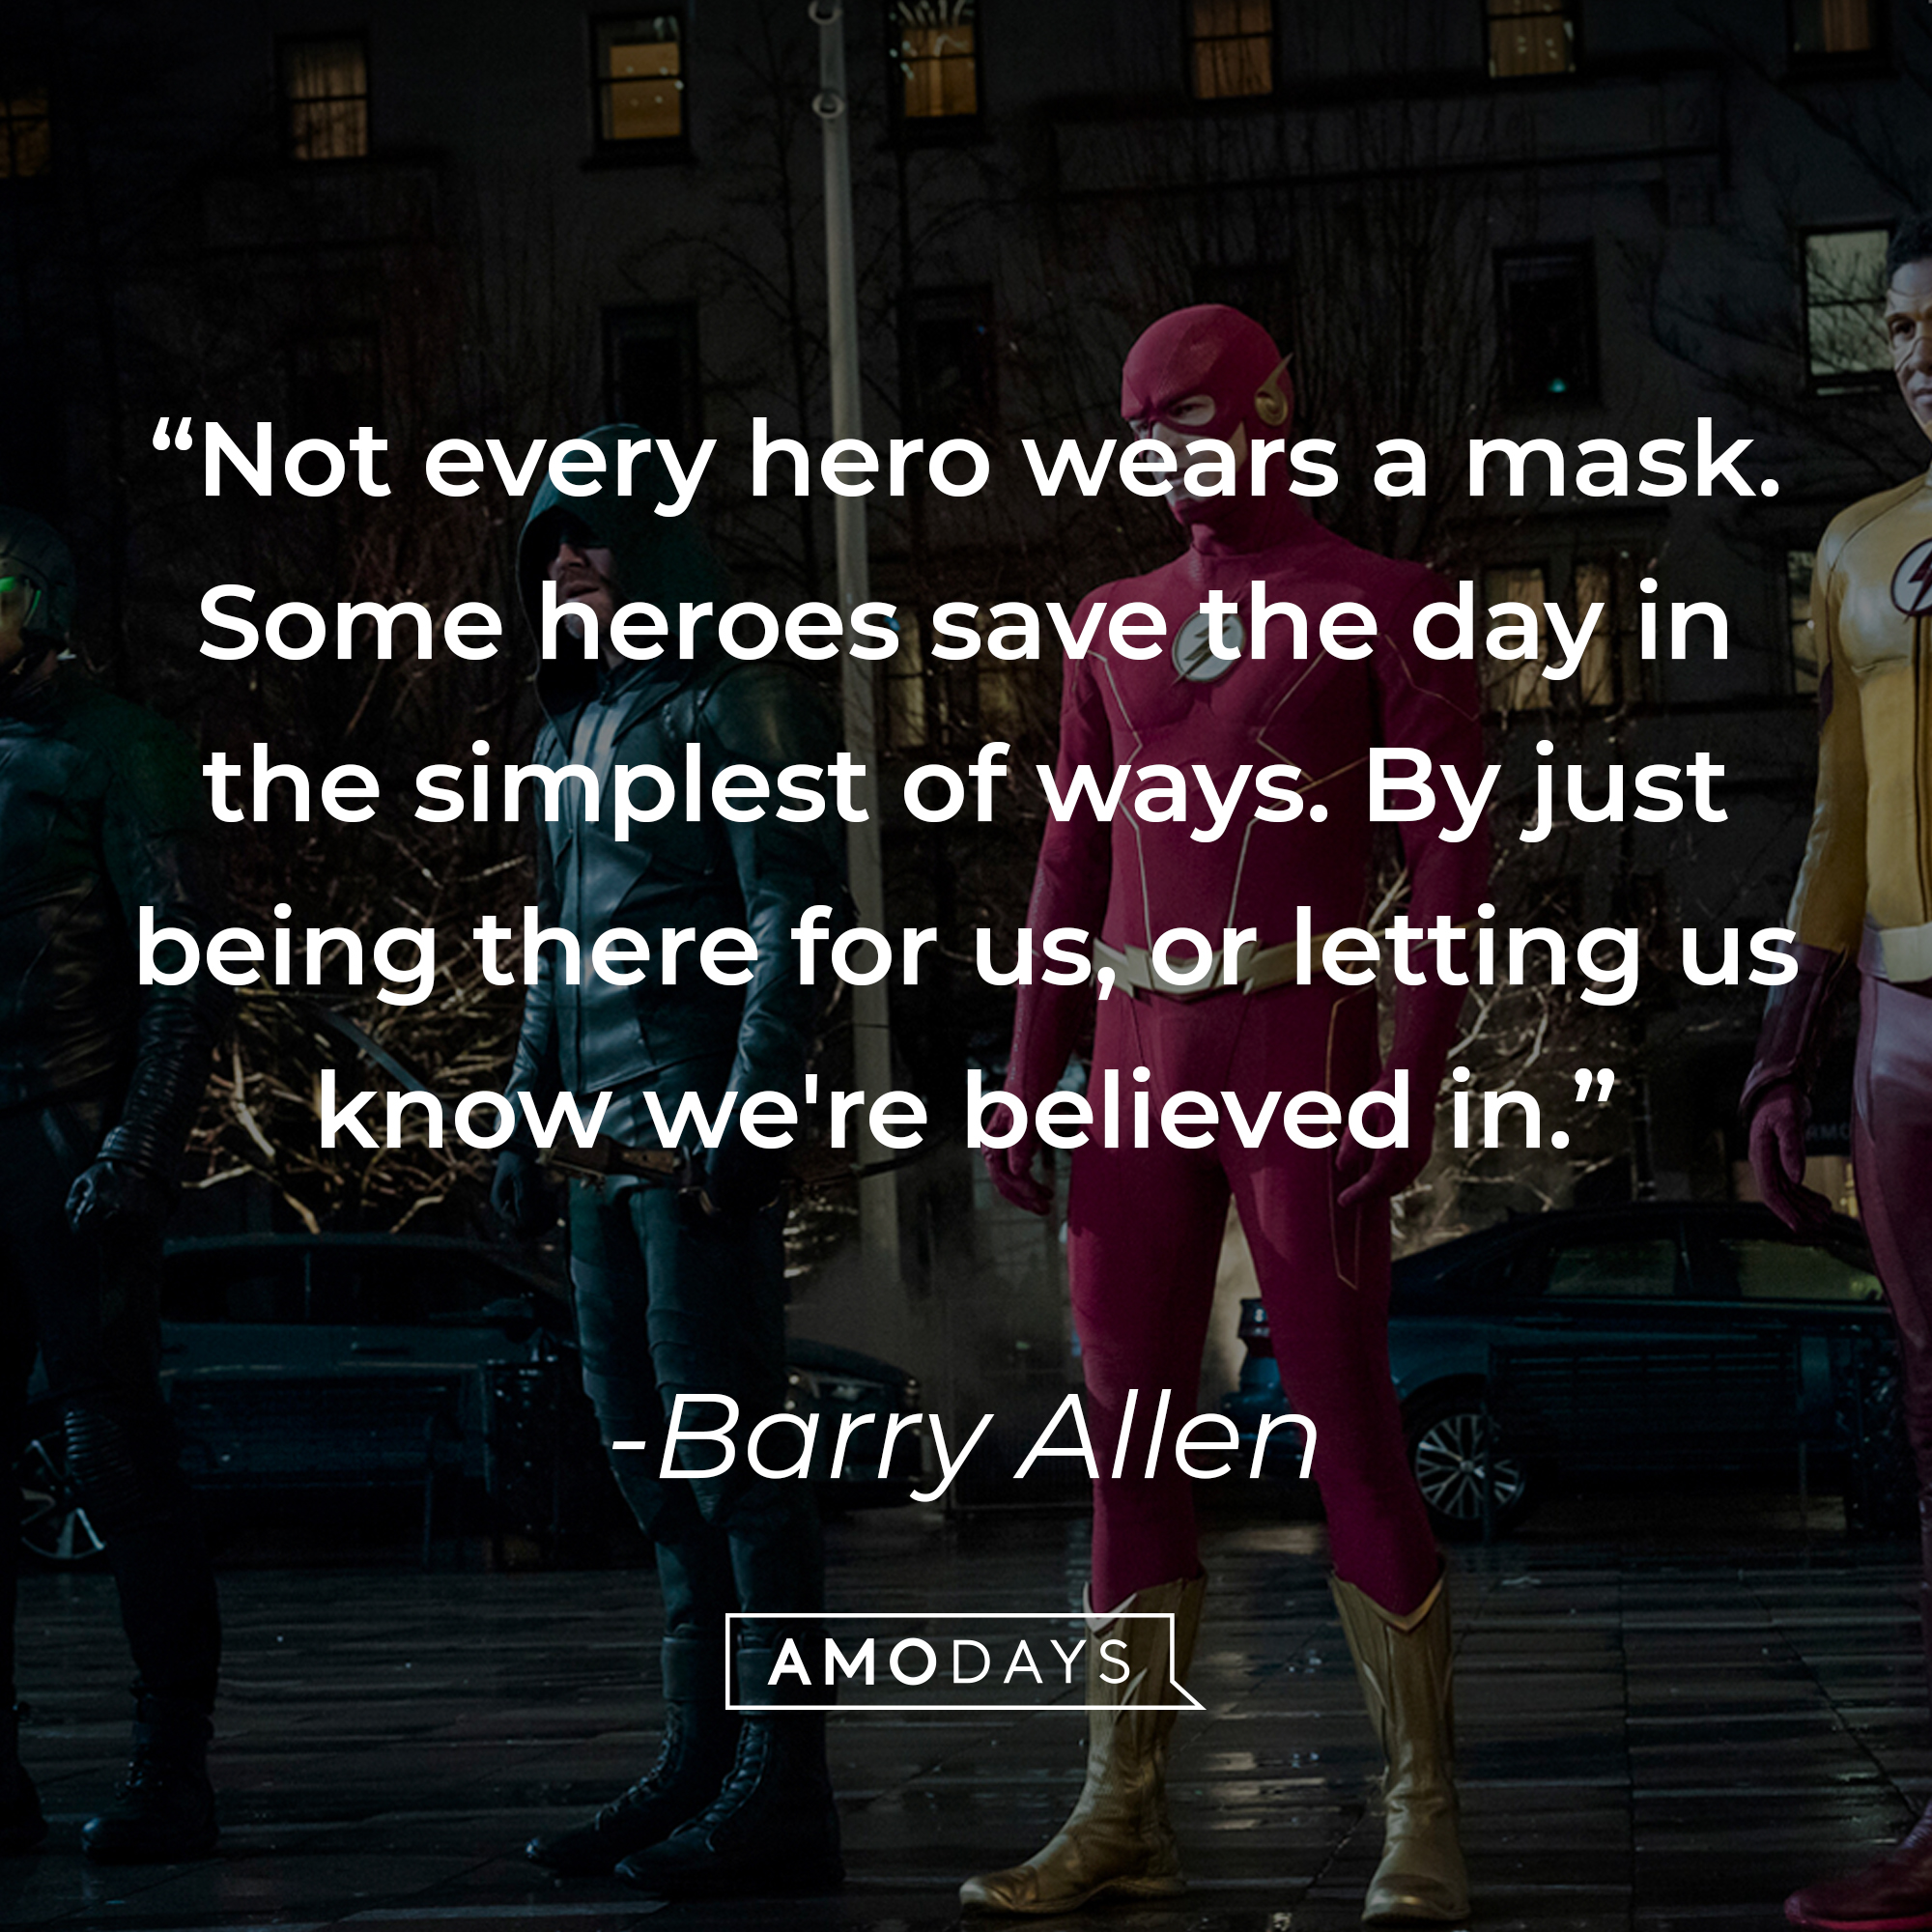 Barry Allen with his quote, "Not every hero wears a mask. Some heroes save the day in the simplest of ways. By just being there for us, or letting us know we're believed in." | Source: Facebook/CWTheFlash